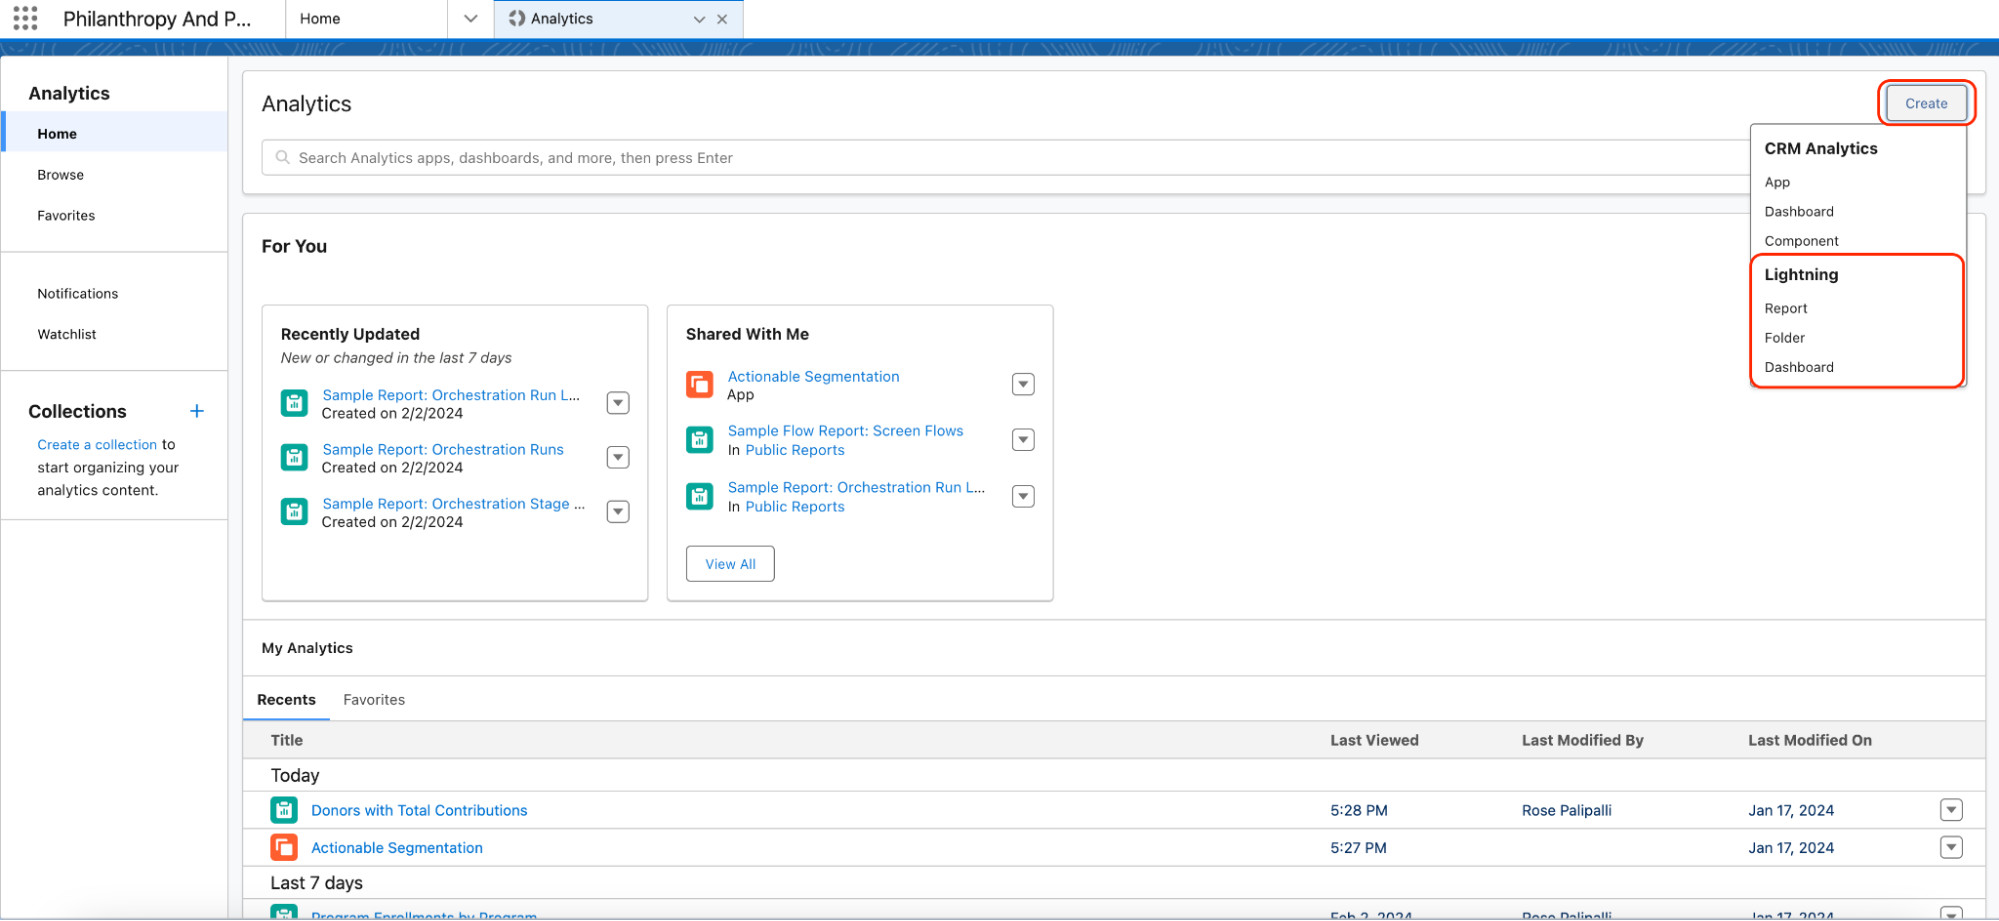 You can also create Lightning reports, dashboards, or folders from the Analytics home.